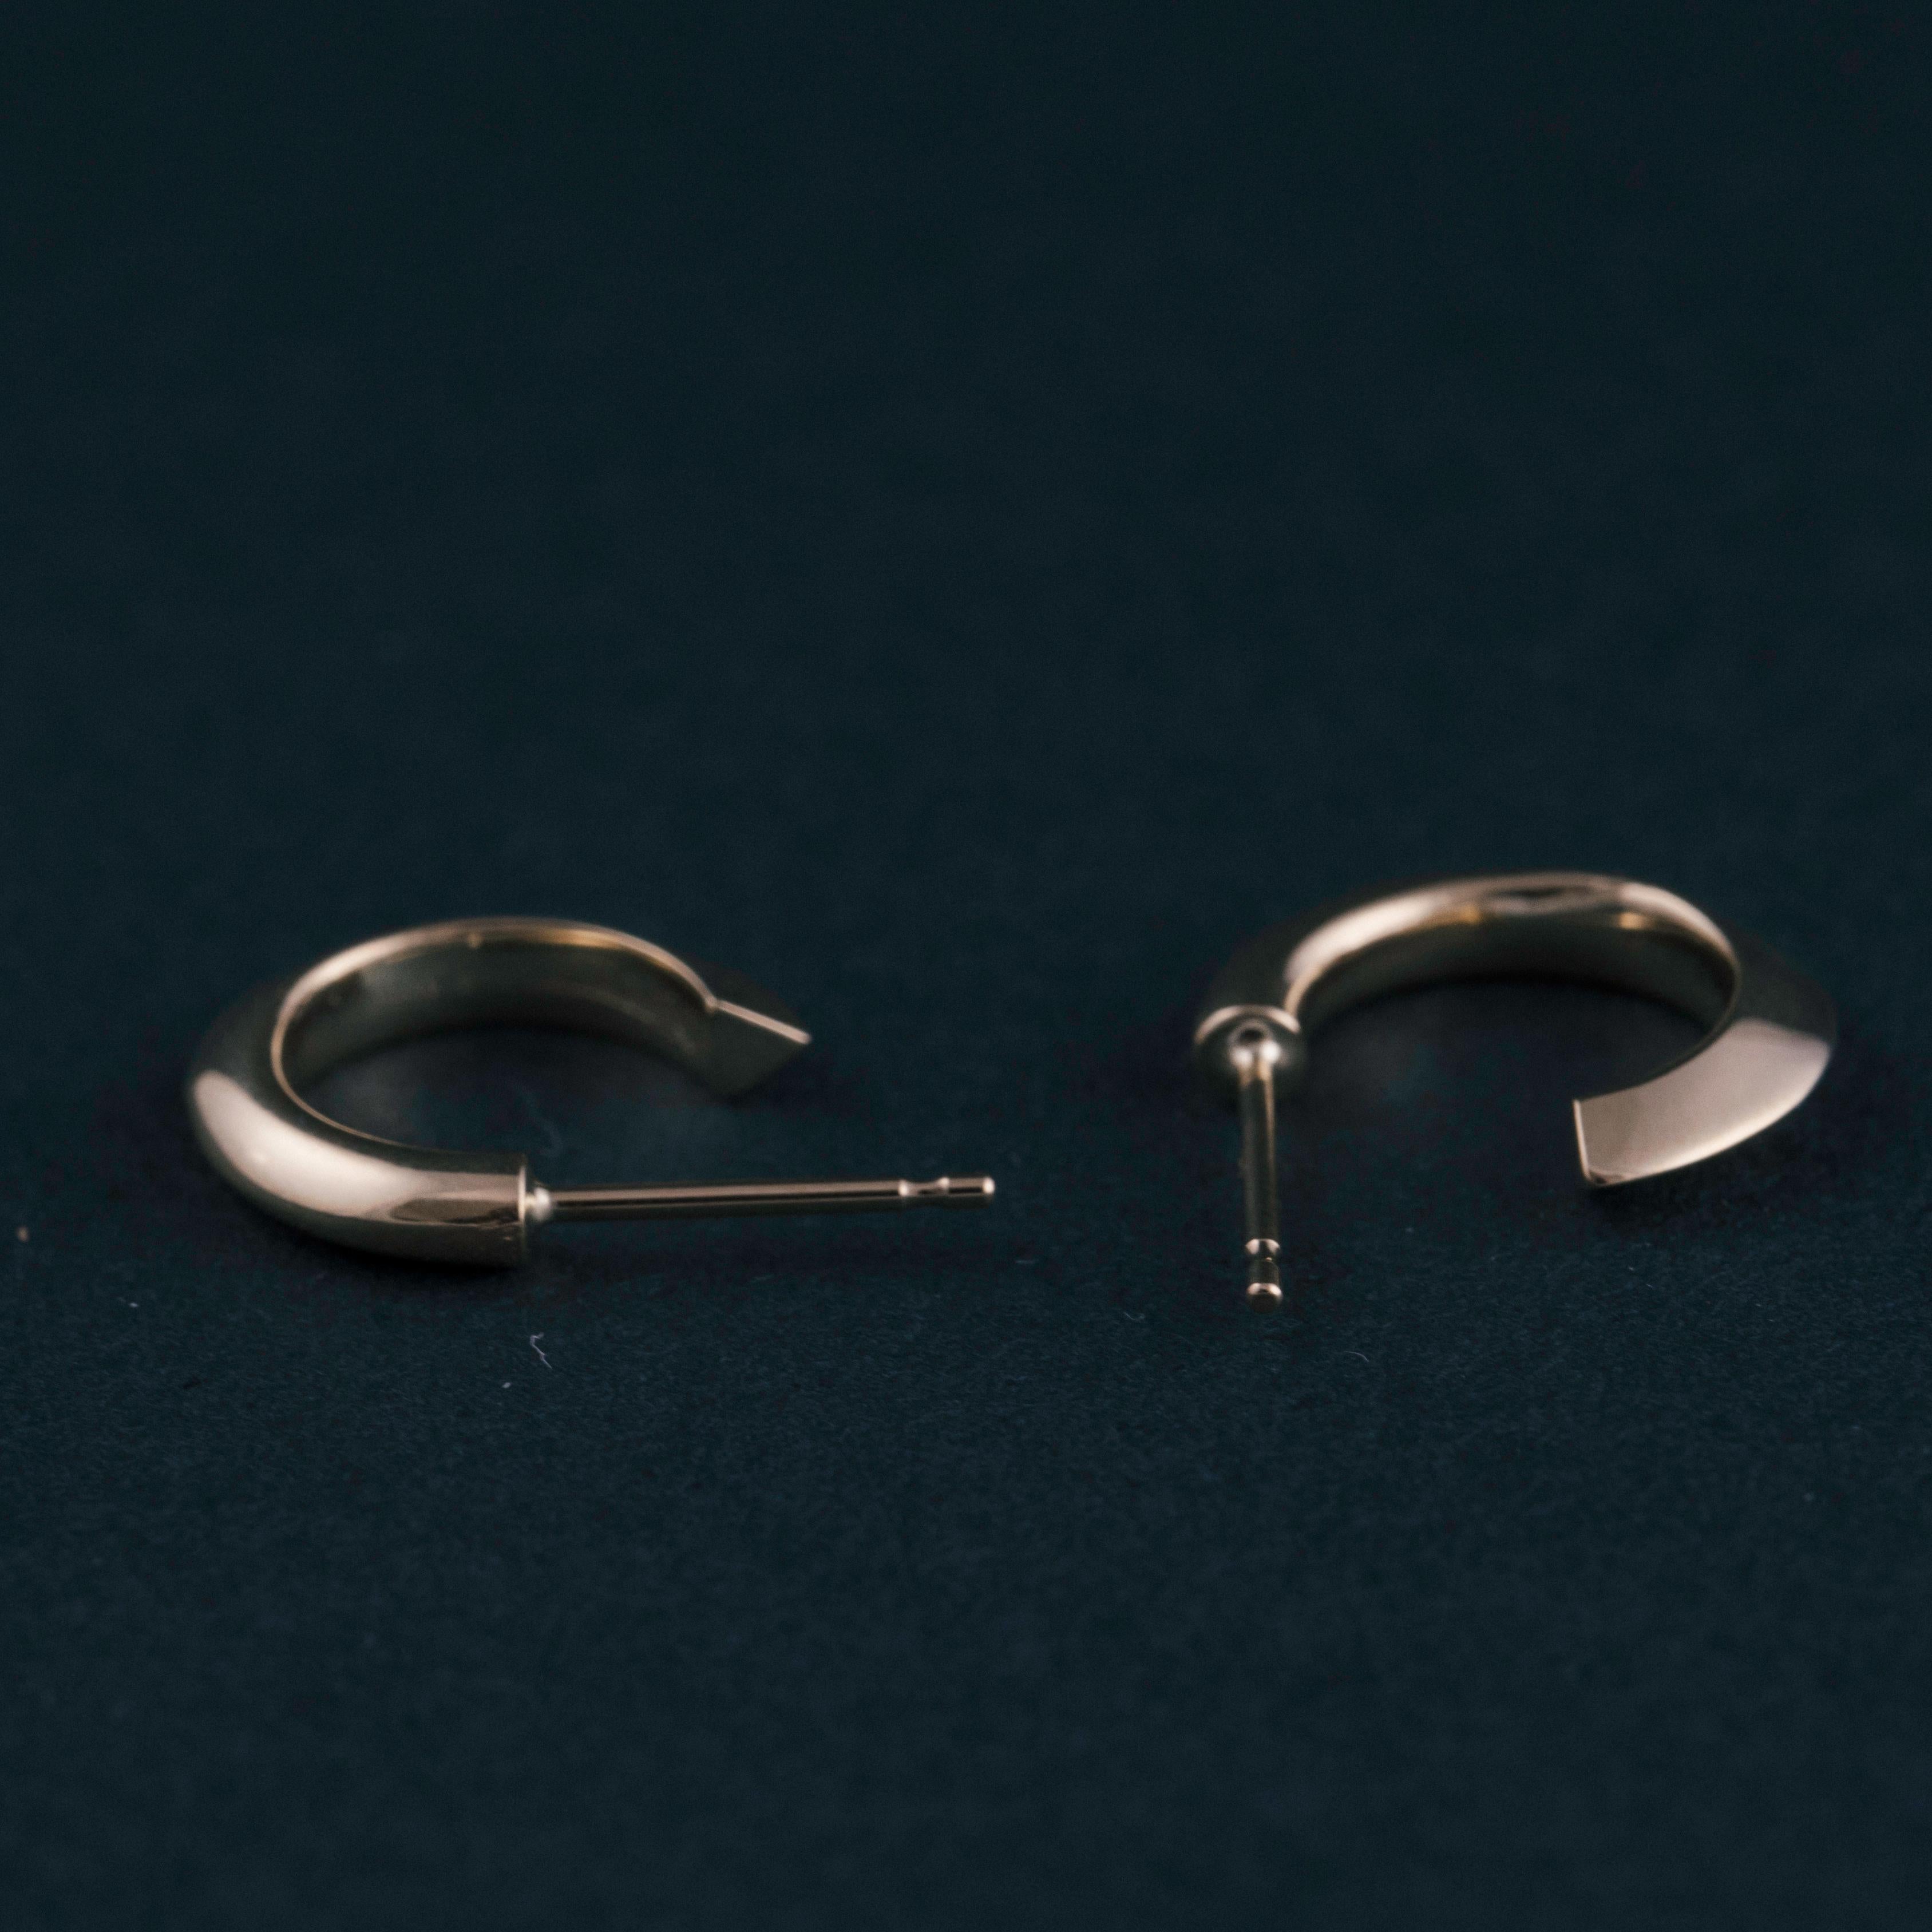 The Small Flow Hoop earrings begin as a circle and smoothly transforms into a triangle. Designed as a comfortable, everyday statement for any occasion, these earrings are a timeless reimagining of a classic. Crafted in solid 14k gold or sterling